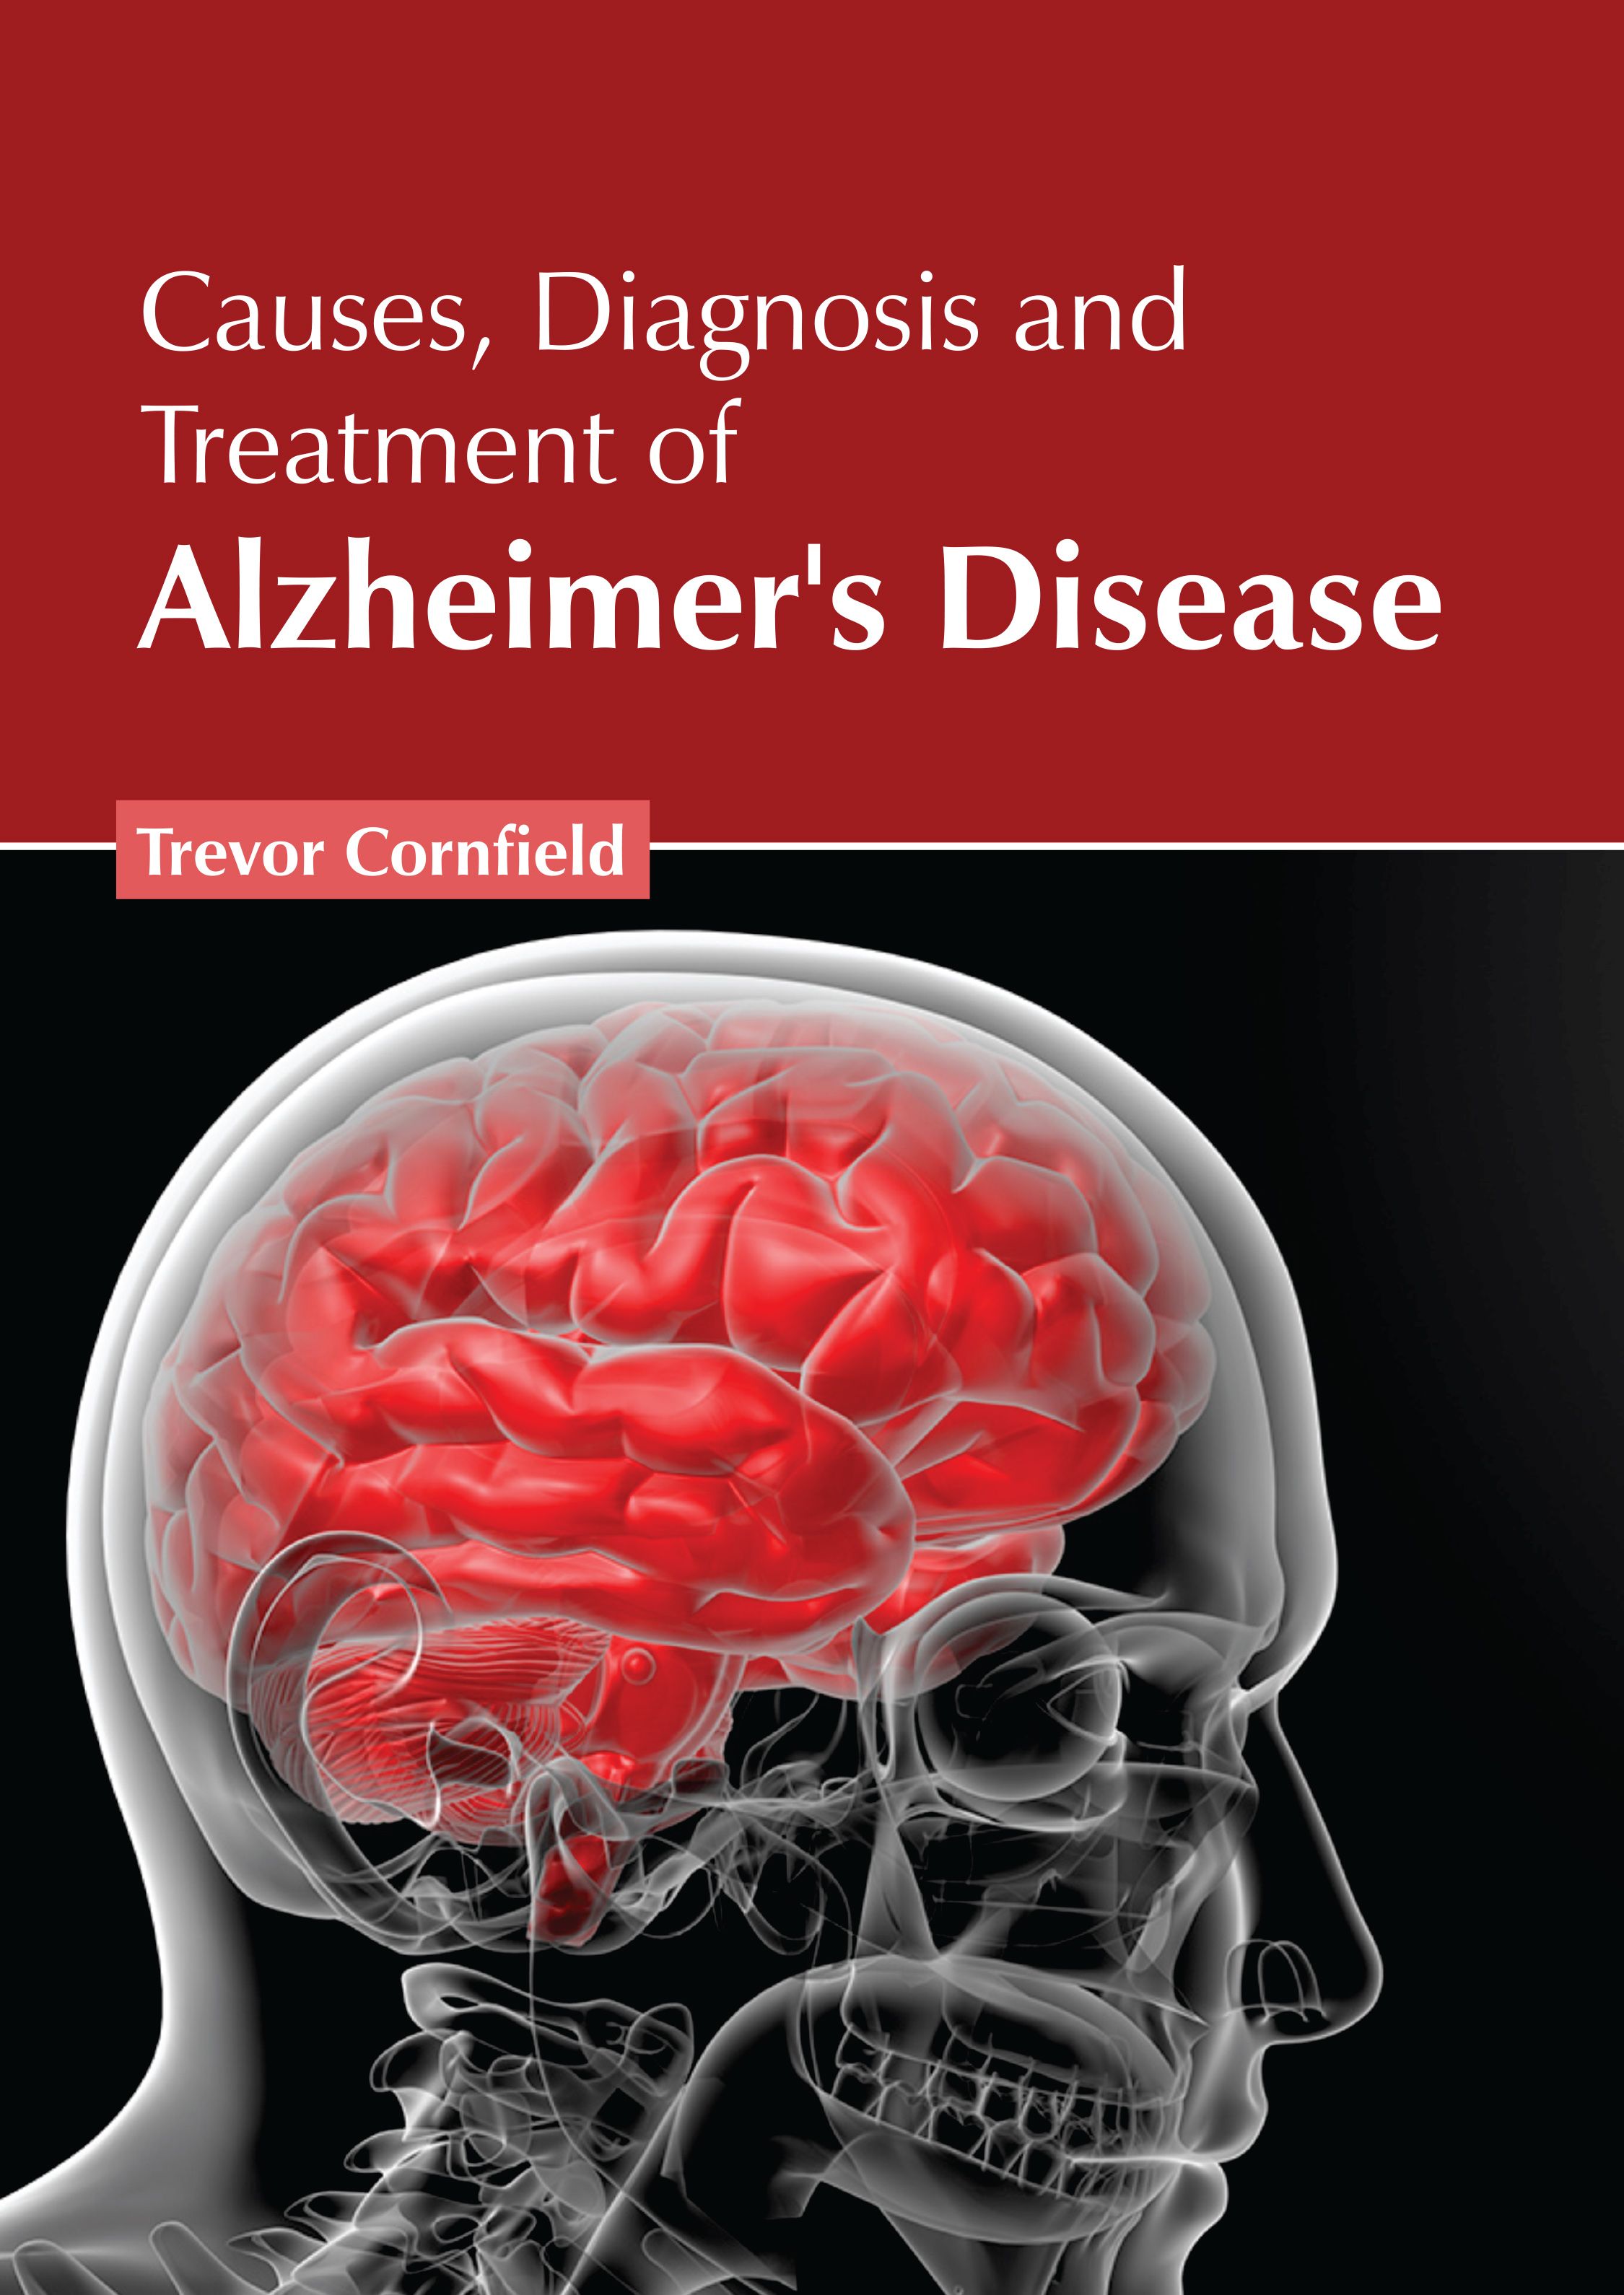 CAUSES, DIAGNOSIS AND TREATMENT OF ALZHEIMER'S DISEASE